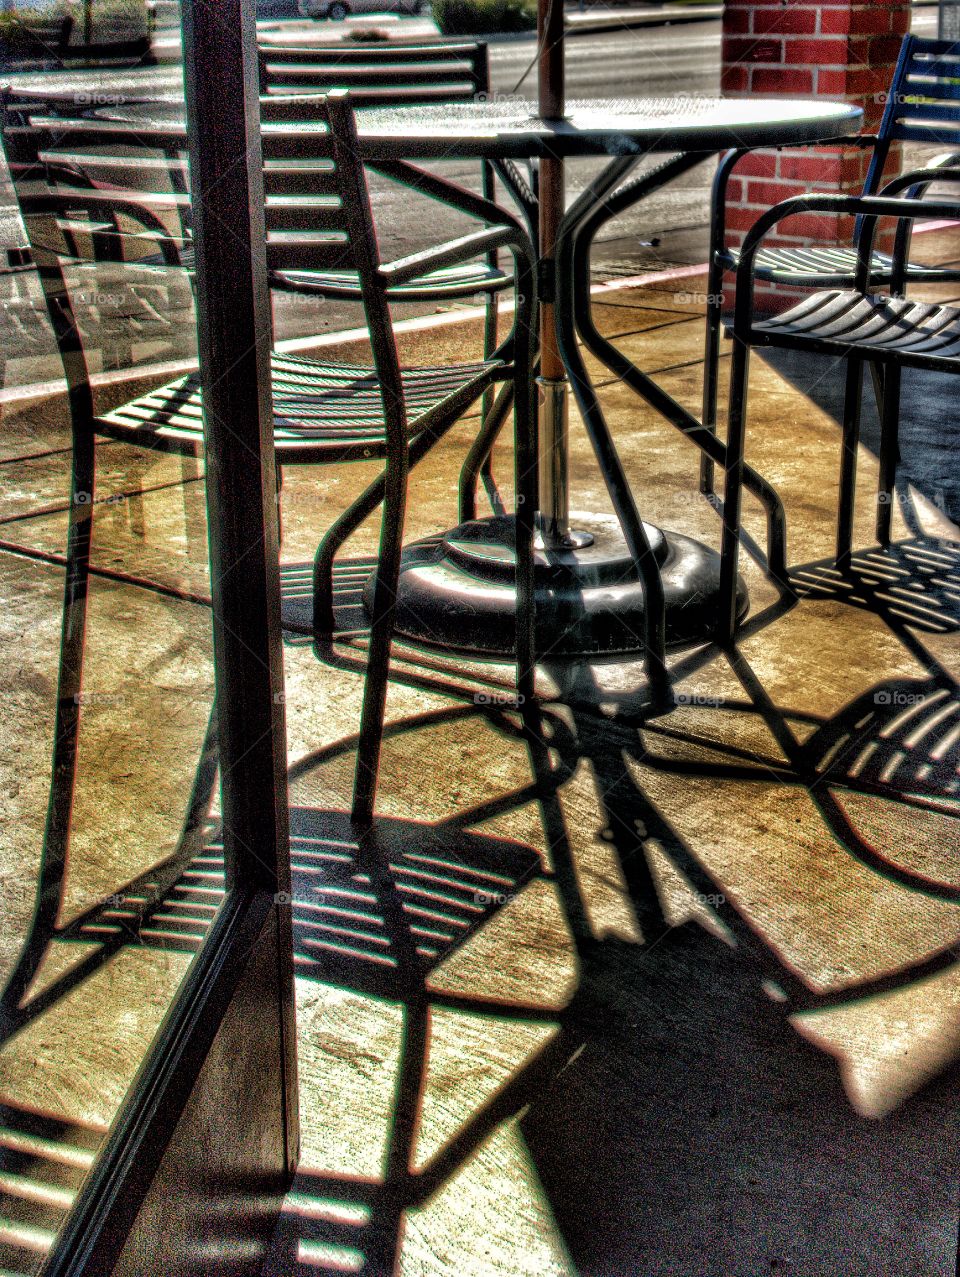 Morning sun hits table and chairs creating a series of defined shade lines while a glass door was closing